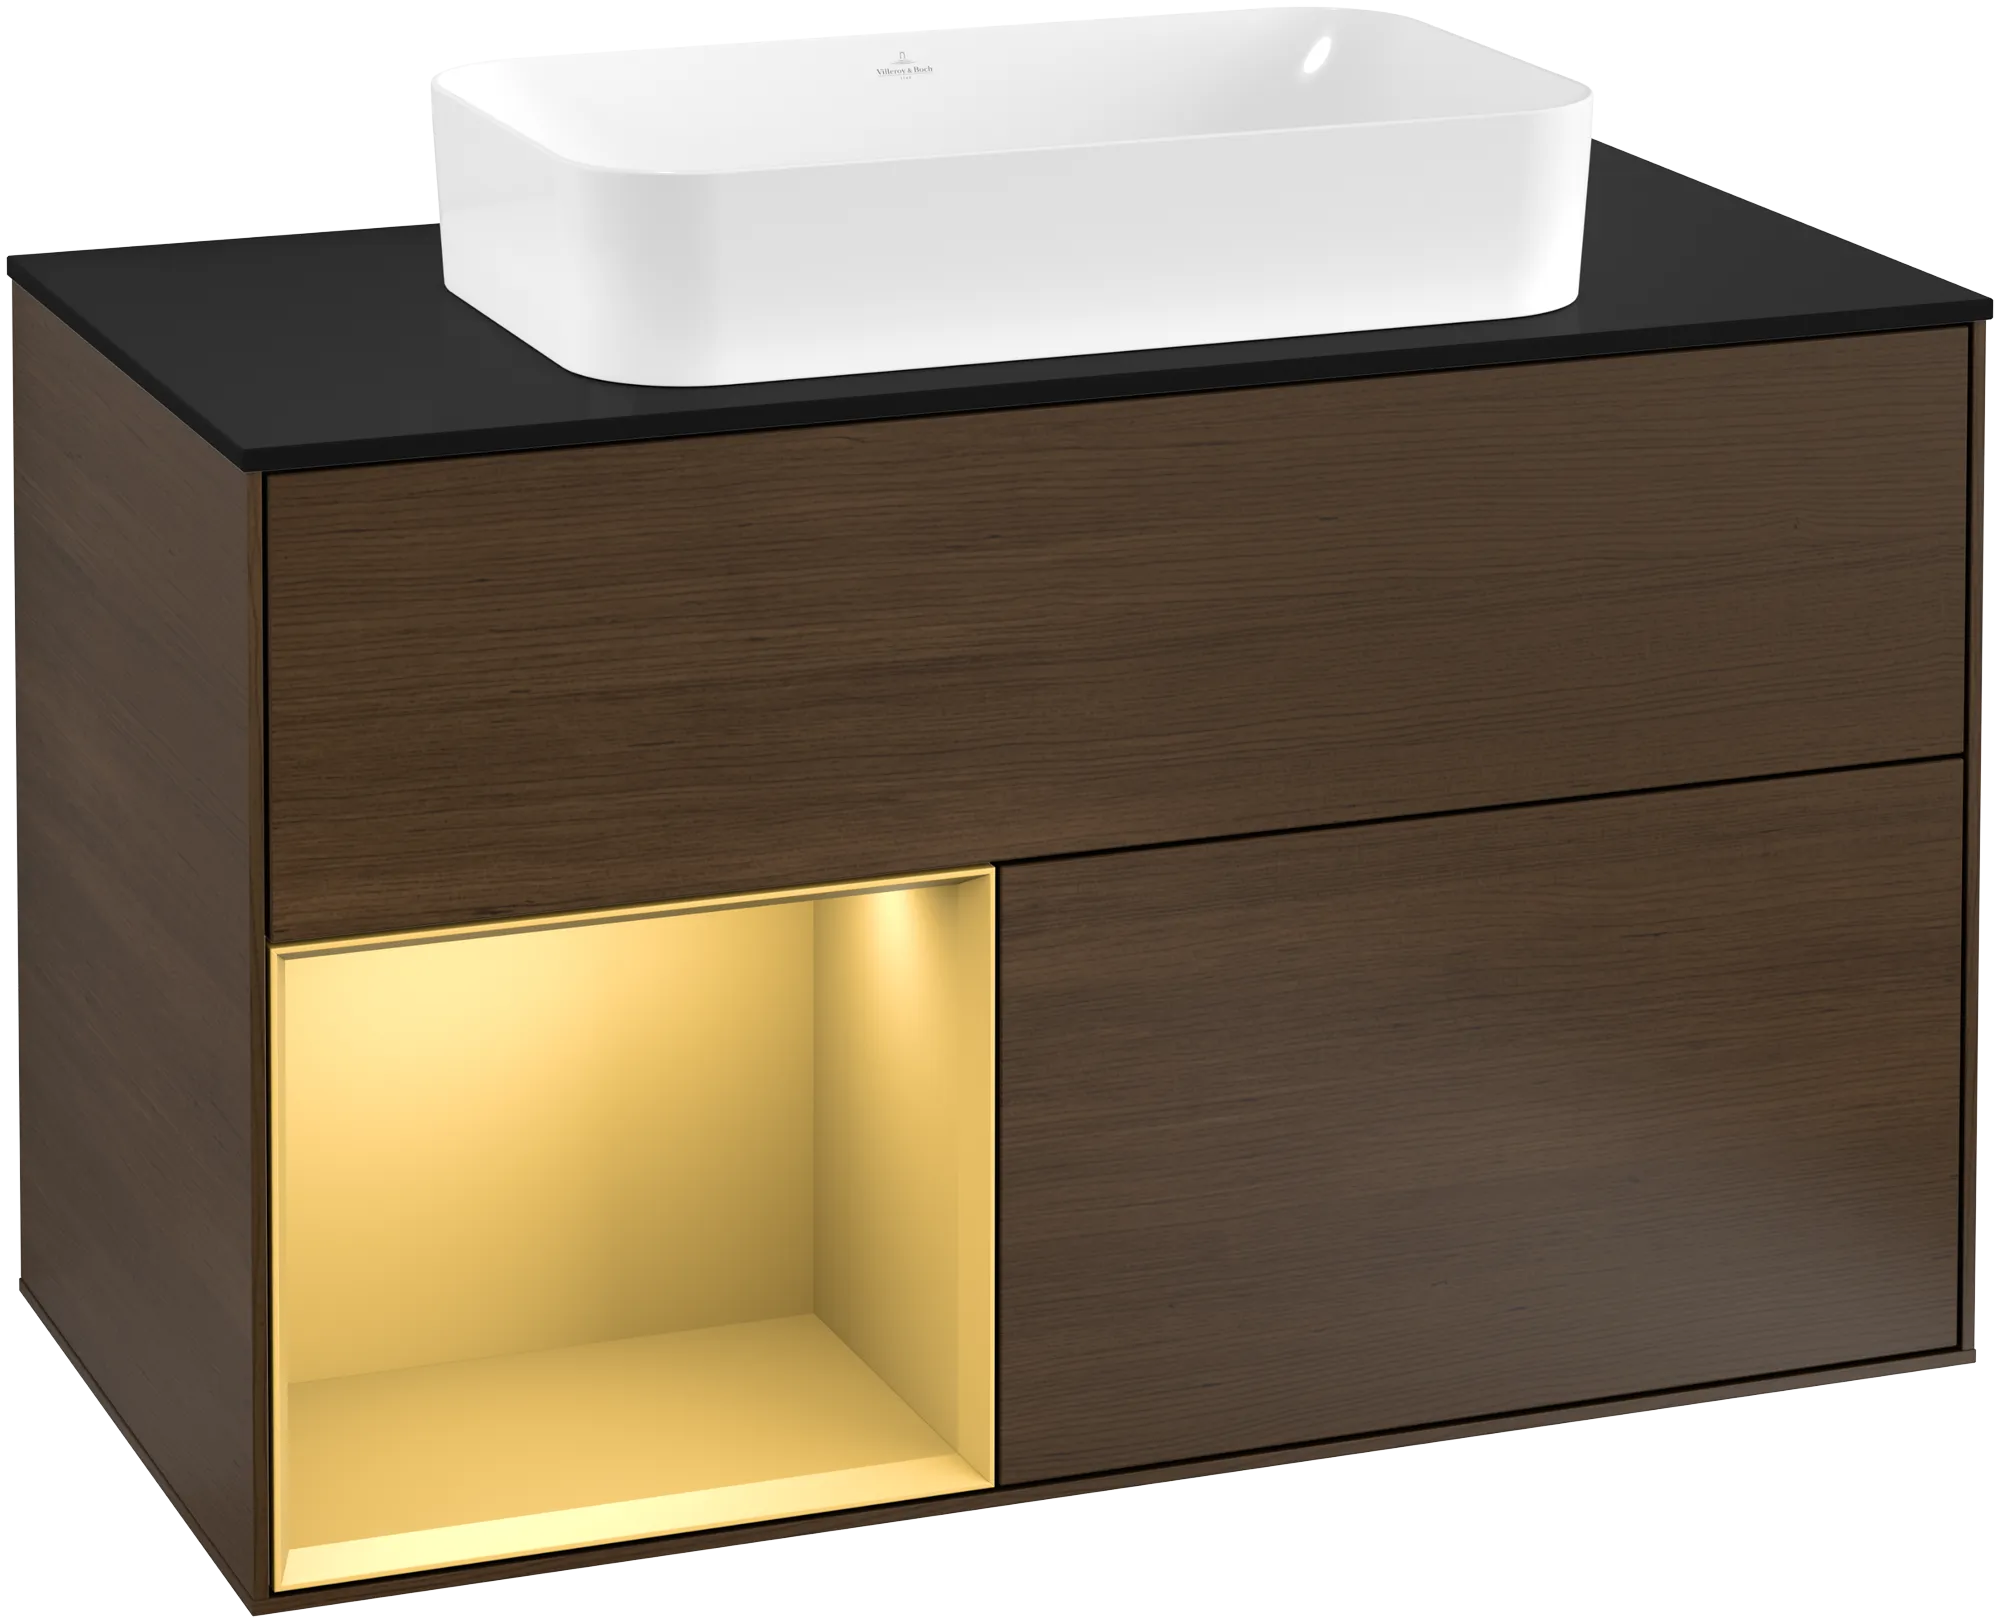 Picture of VILLEROY BOCH Finion Vanity unit, with lighting, 2 pull-out compartments, 1000 x 603 x 501 mm, Walnut Veneer / Gold Matt Lacquer / Glass Black Matt #G242HFGN